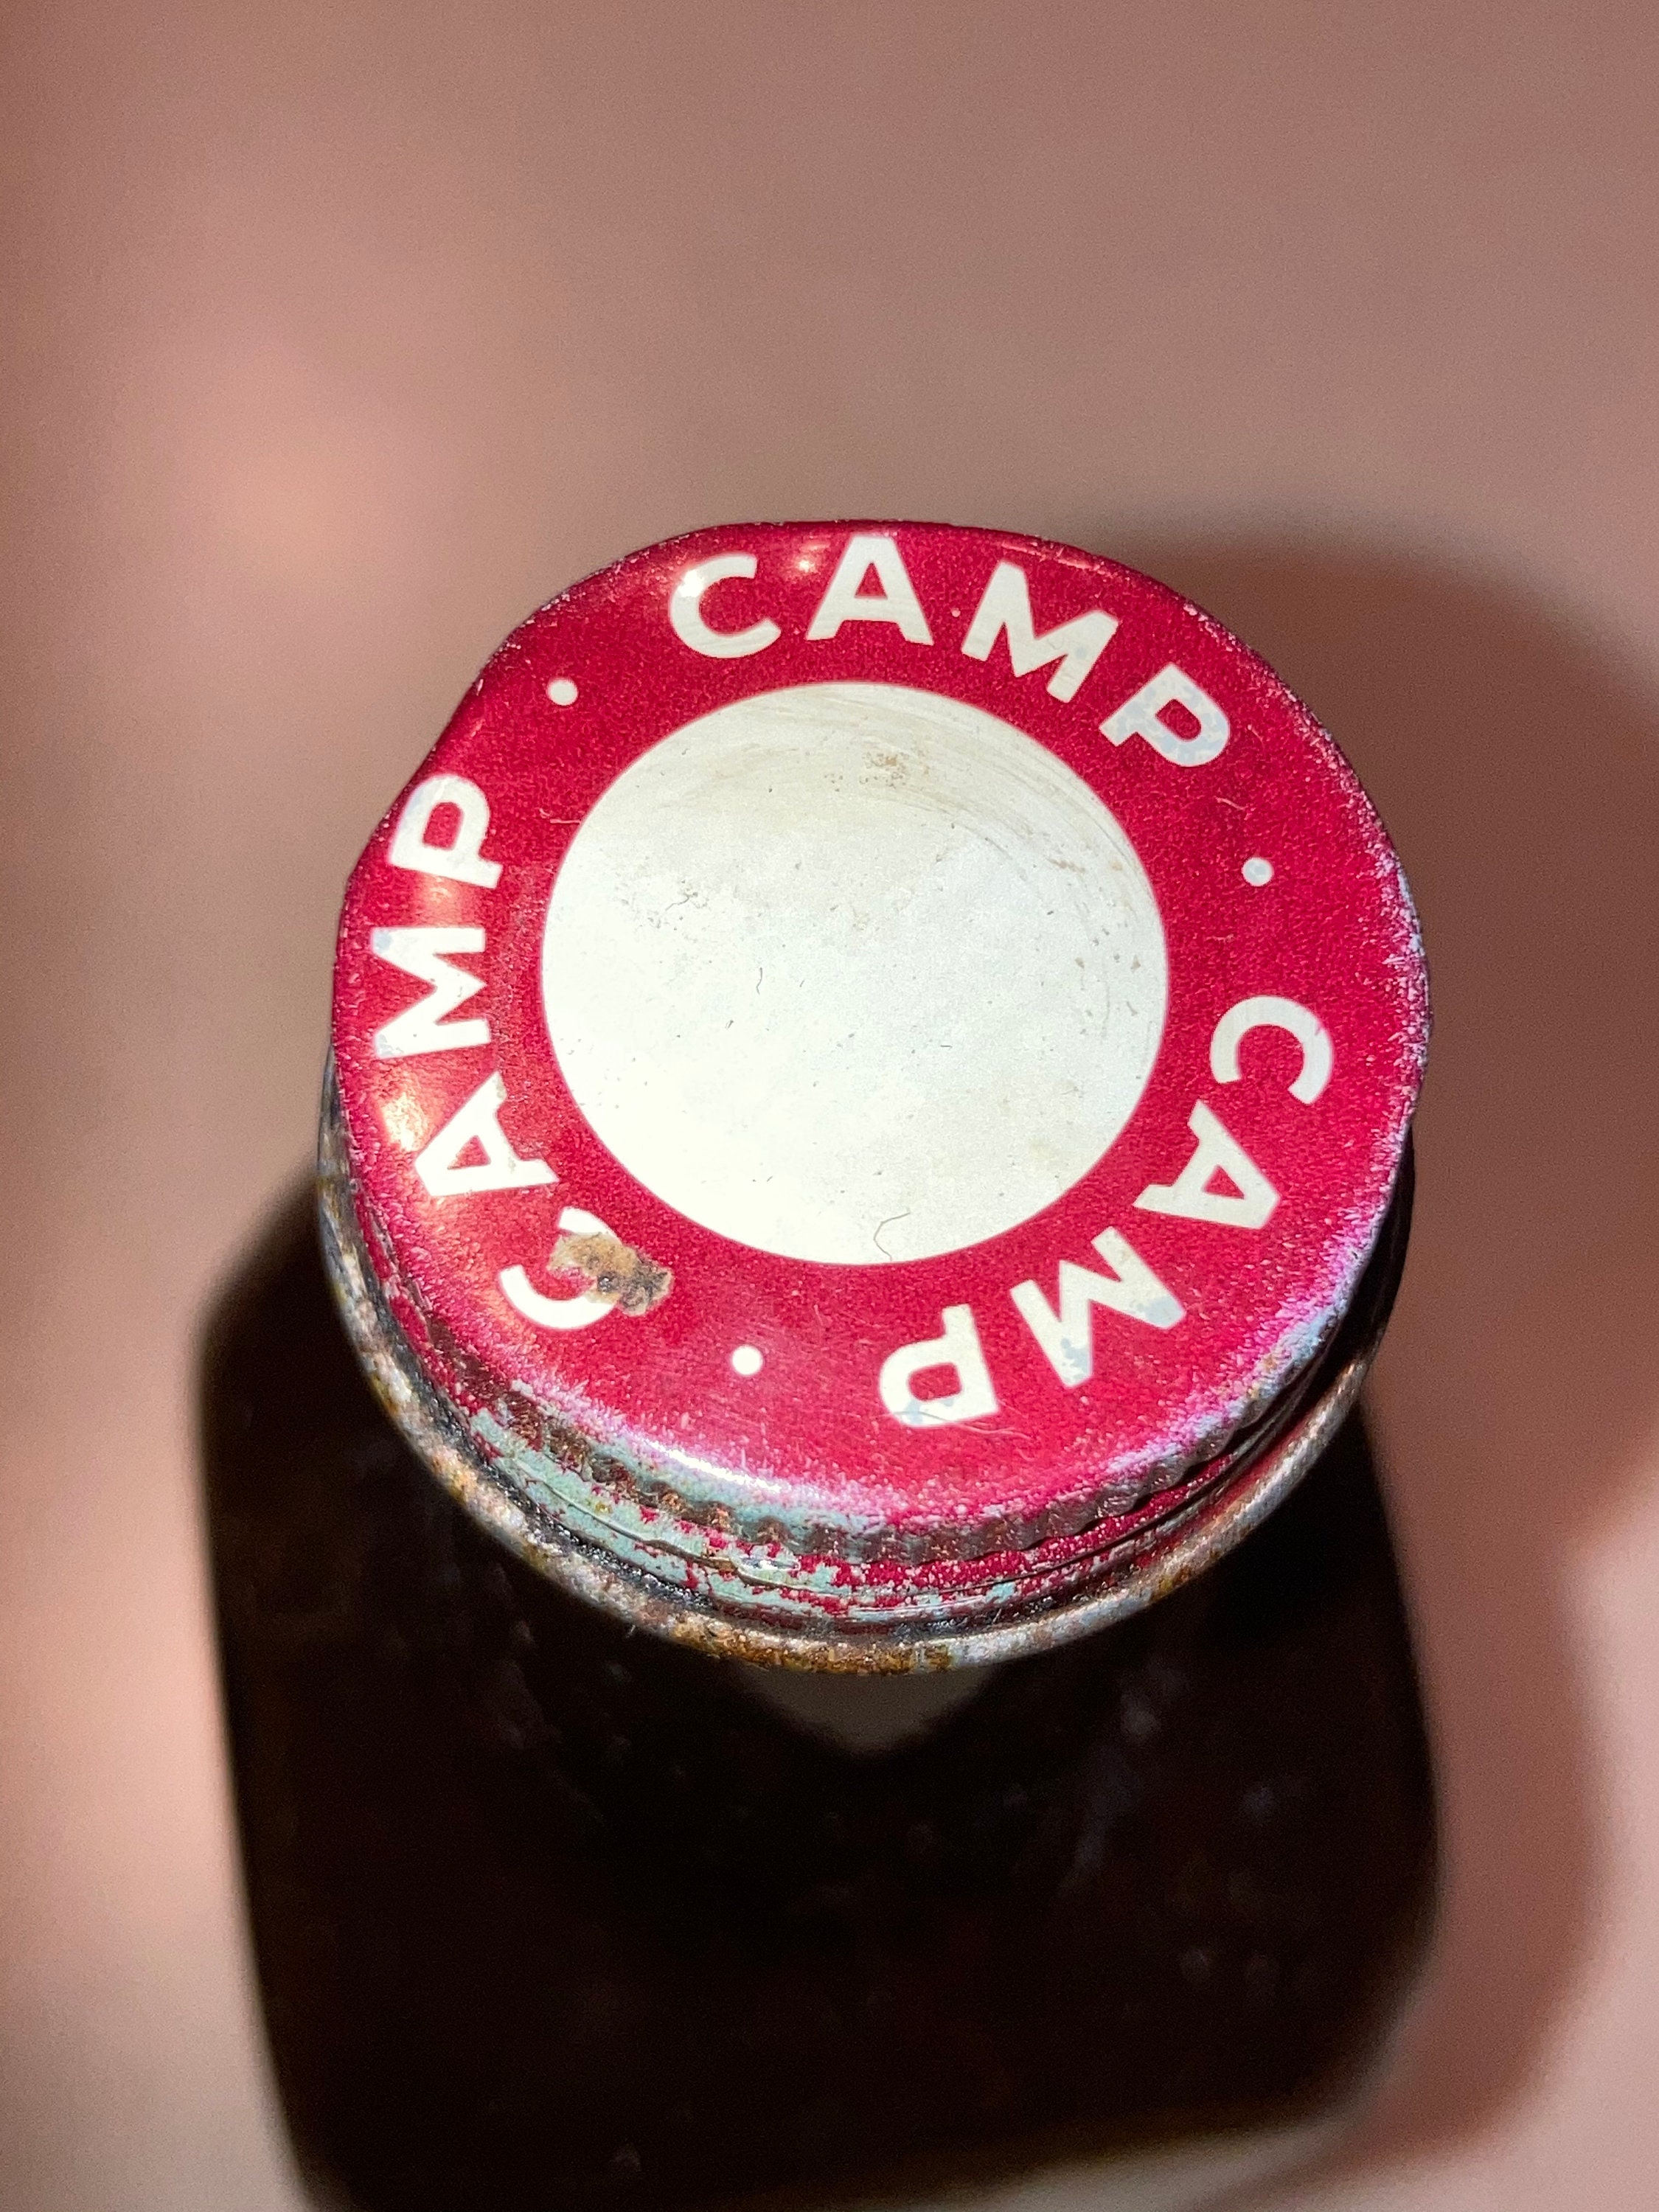 Vintage Bottle: Camp Coffee and Chicory; R. Paterson & Sons